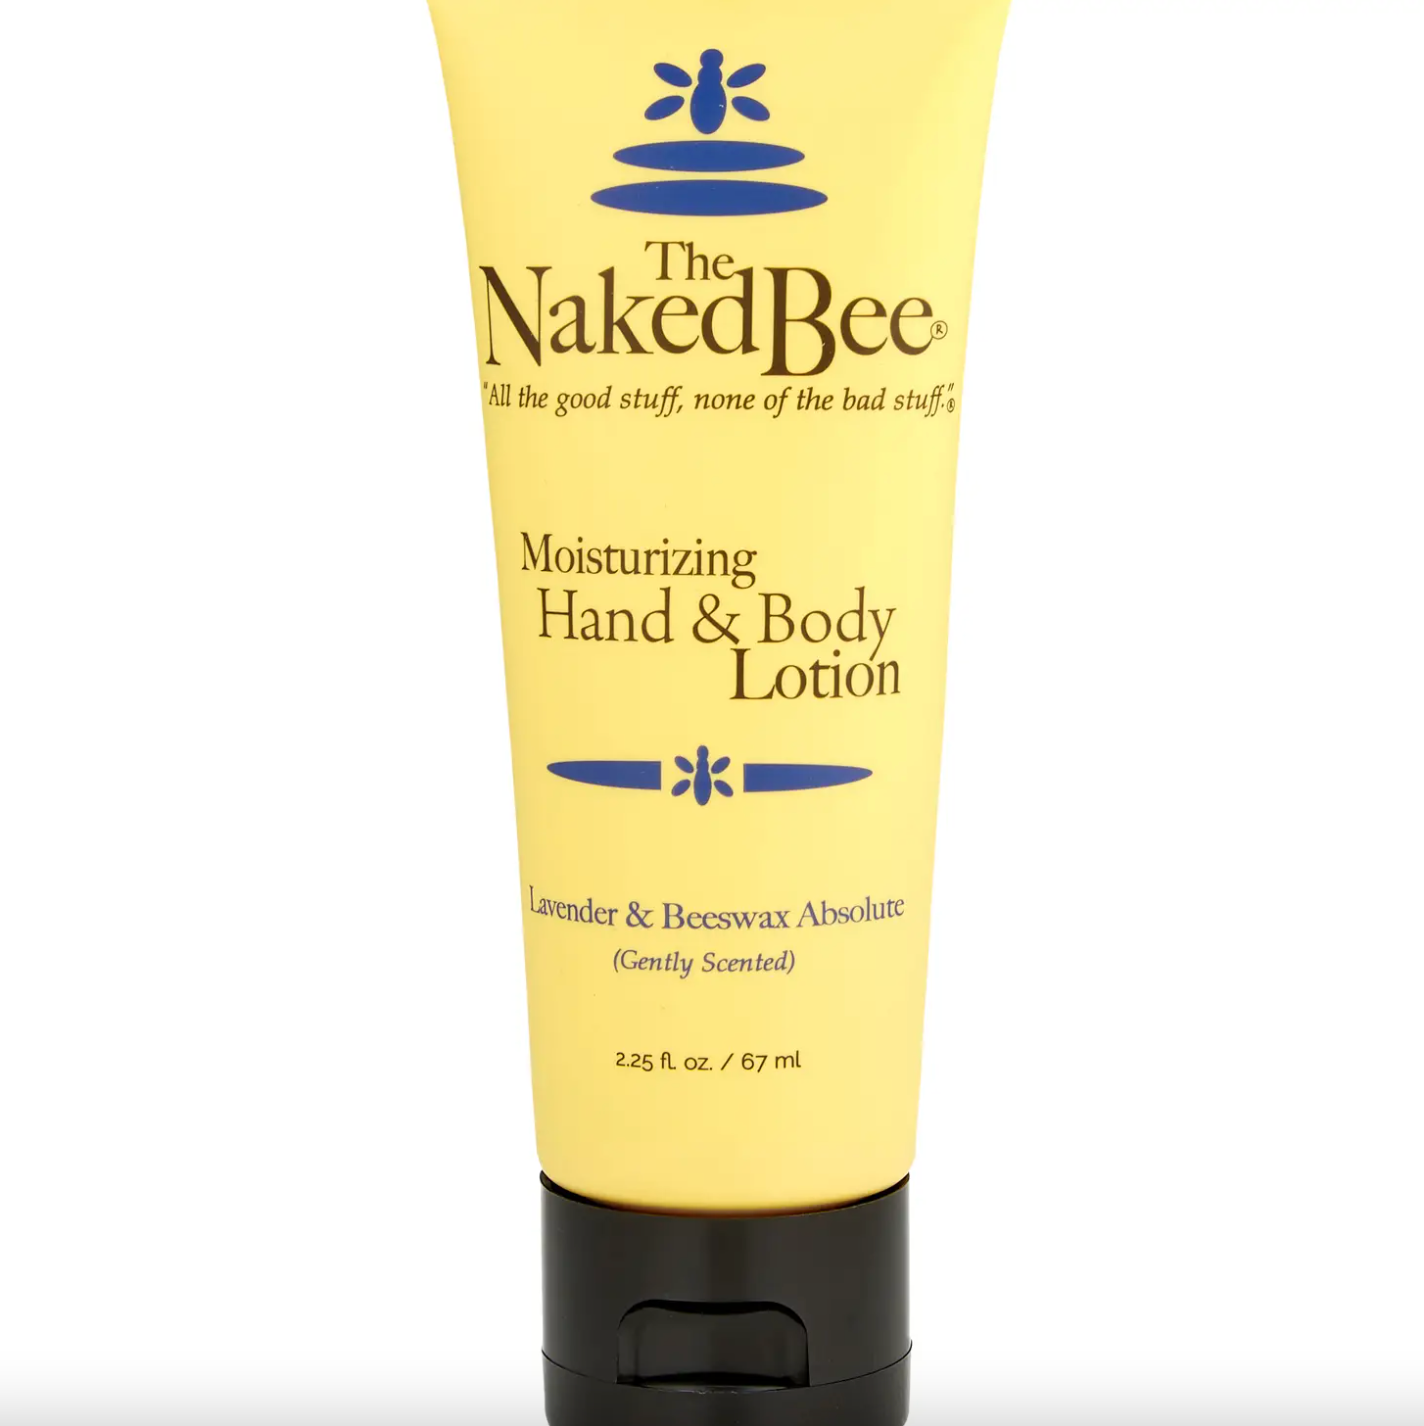 2.25 oz. Lavender & Beeswax Absolute Hand & Body Lotion